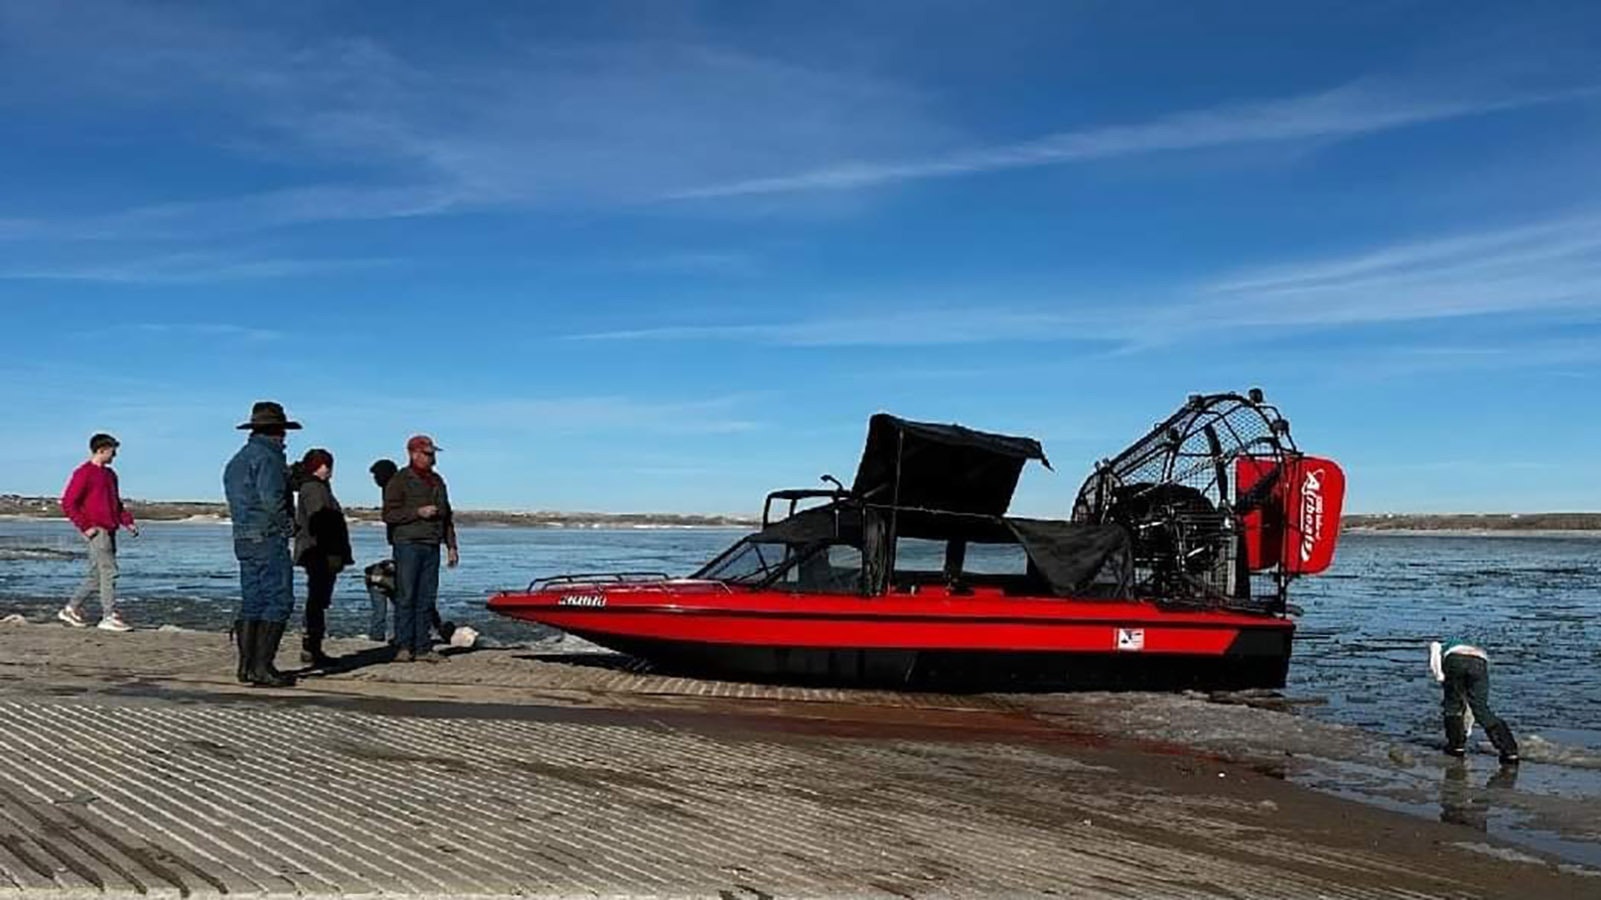 The airboat on a lake shore before the snow started flying in Wyoming.